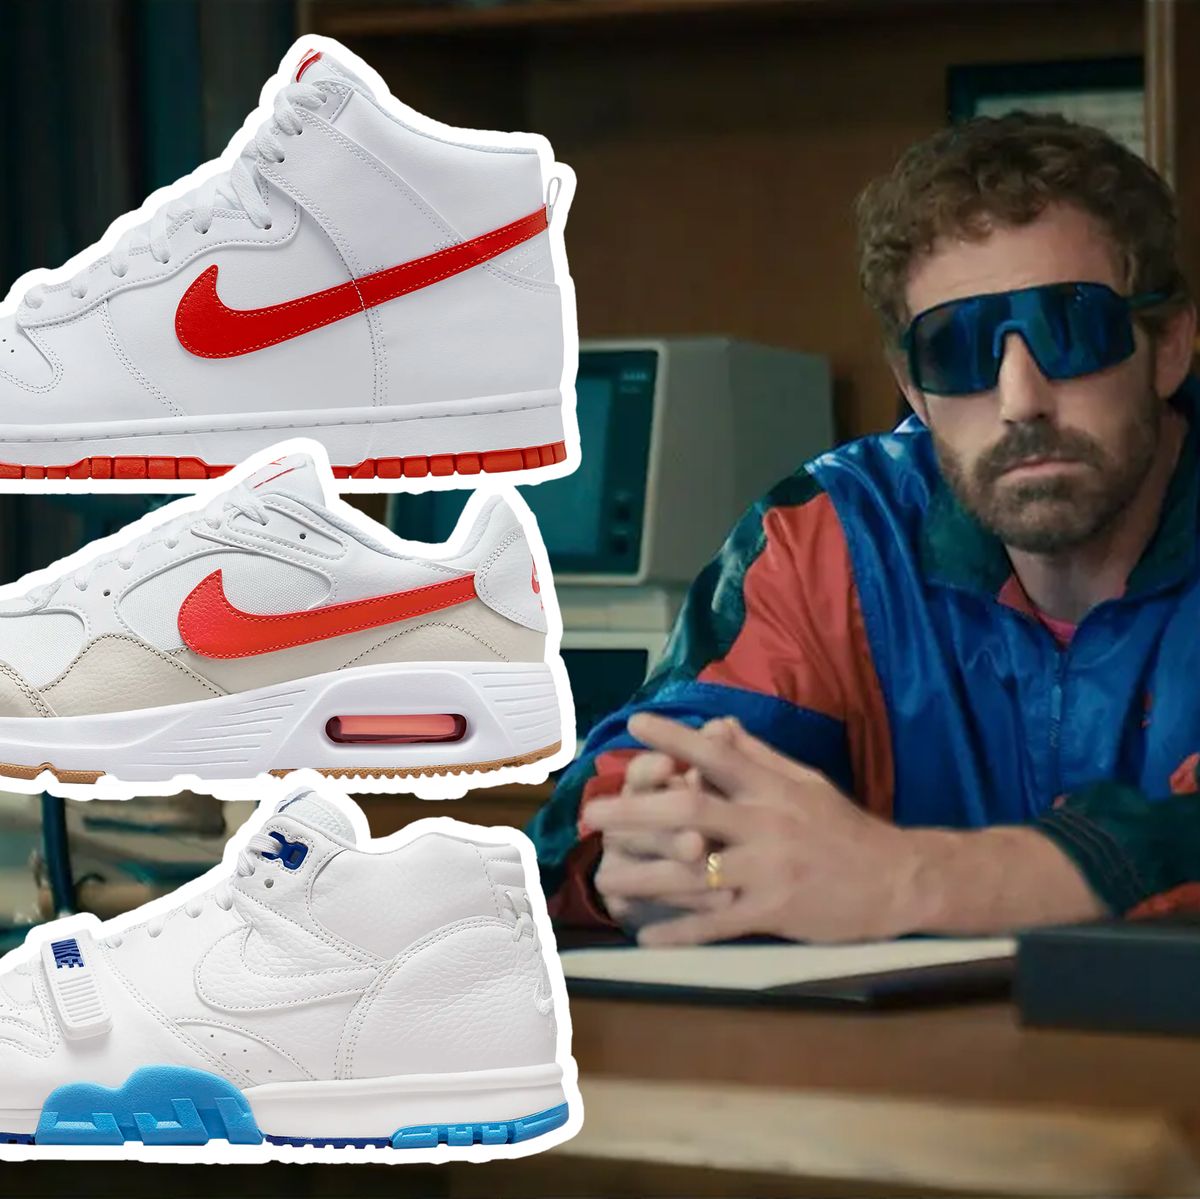 10 Nike Sneakers You Buy Now That Capture the 1980s Vibes of 'Air'